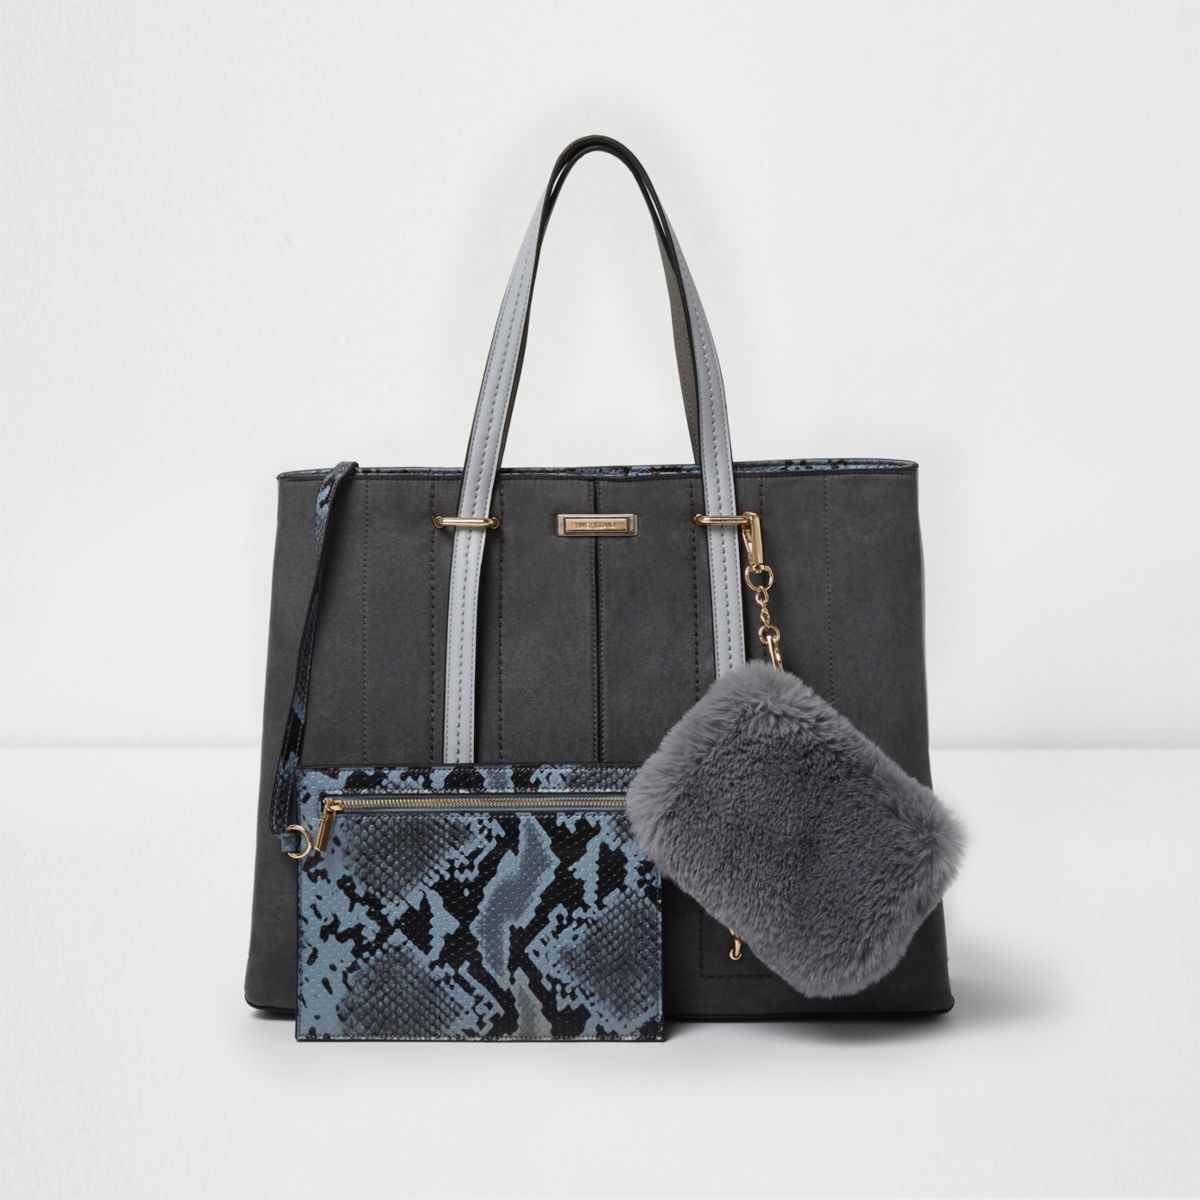 Grey large tote bag and snakeskin pouchette - Shopper & Tote Bags - Bags & Purses - women